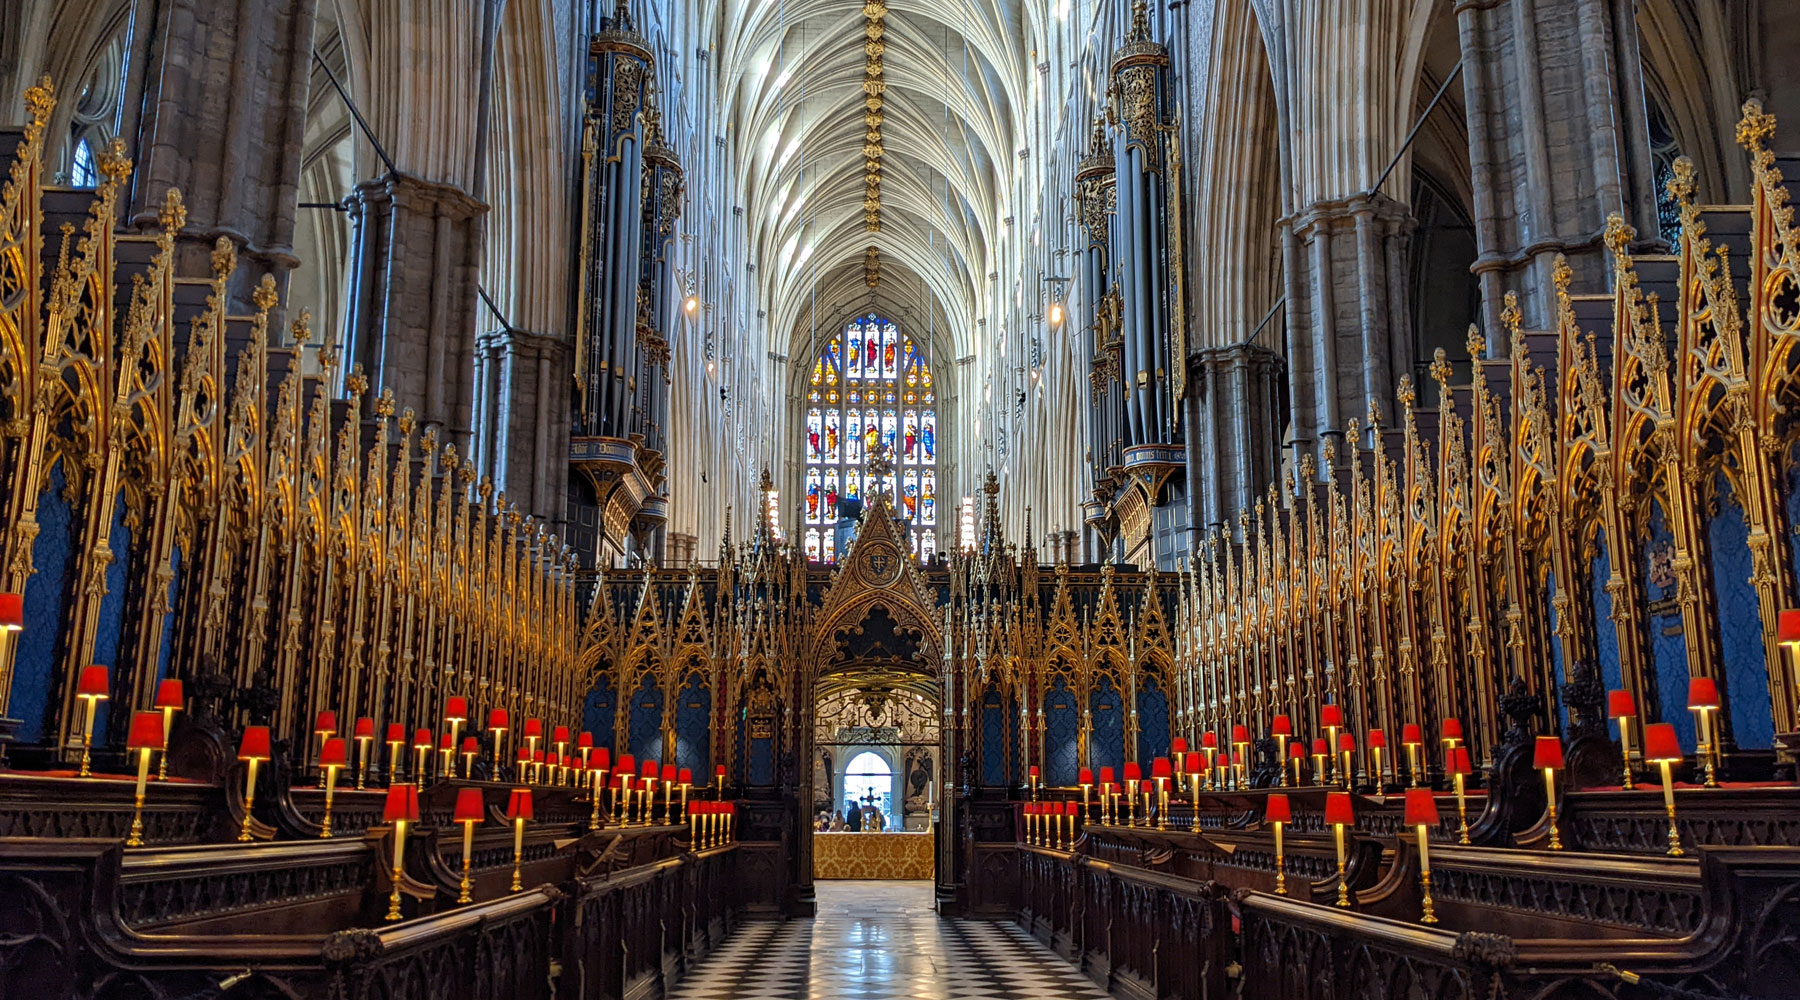 Photos from inside Westminster Abbey